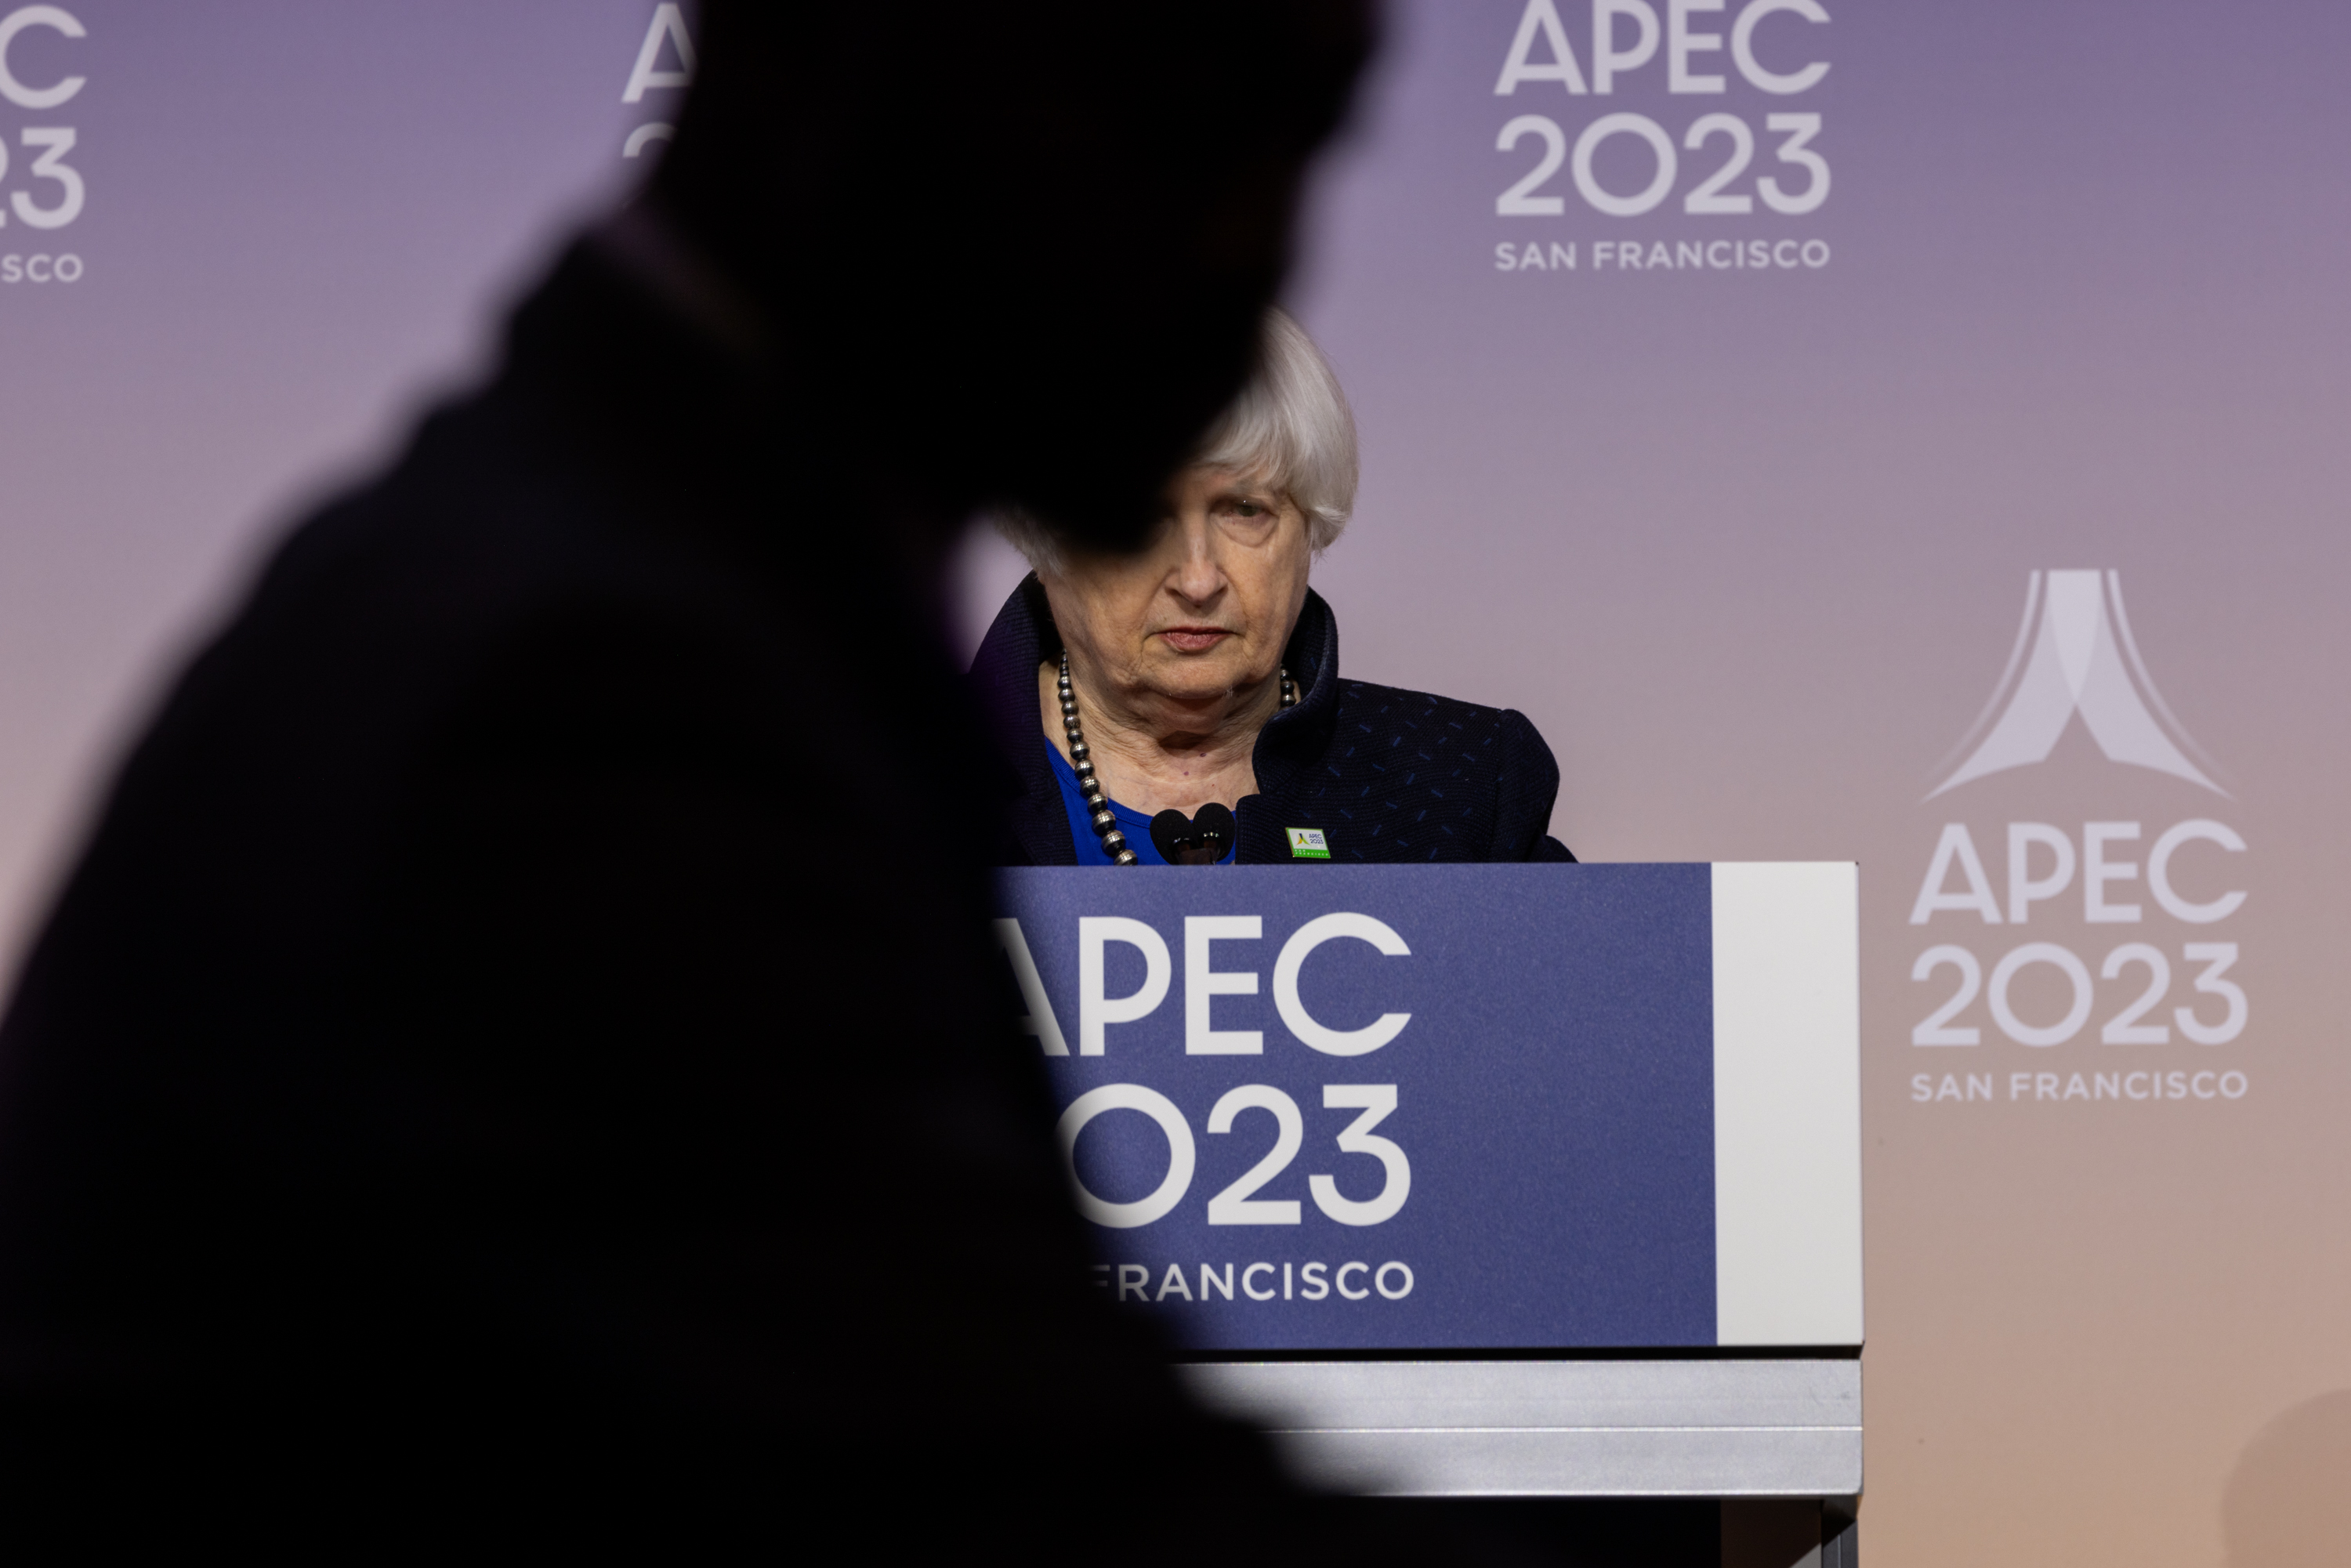 Janet Yellen, United States Secretary of the Treasury, stands behin a podium that read APEC 2023 as a silhouette of a person blocks a portion of her face.